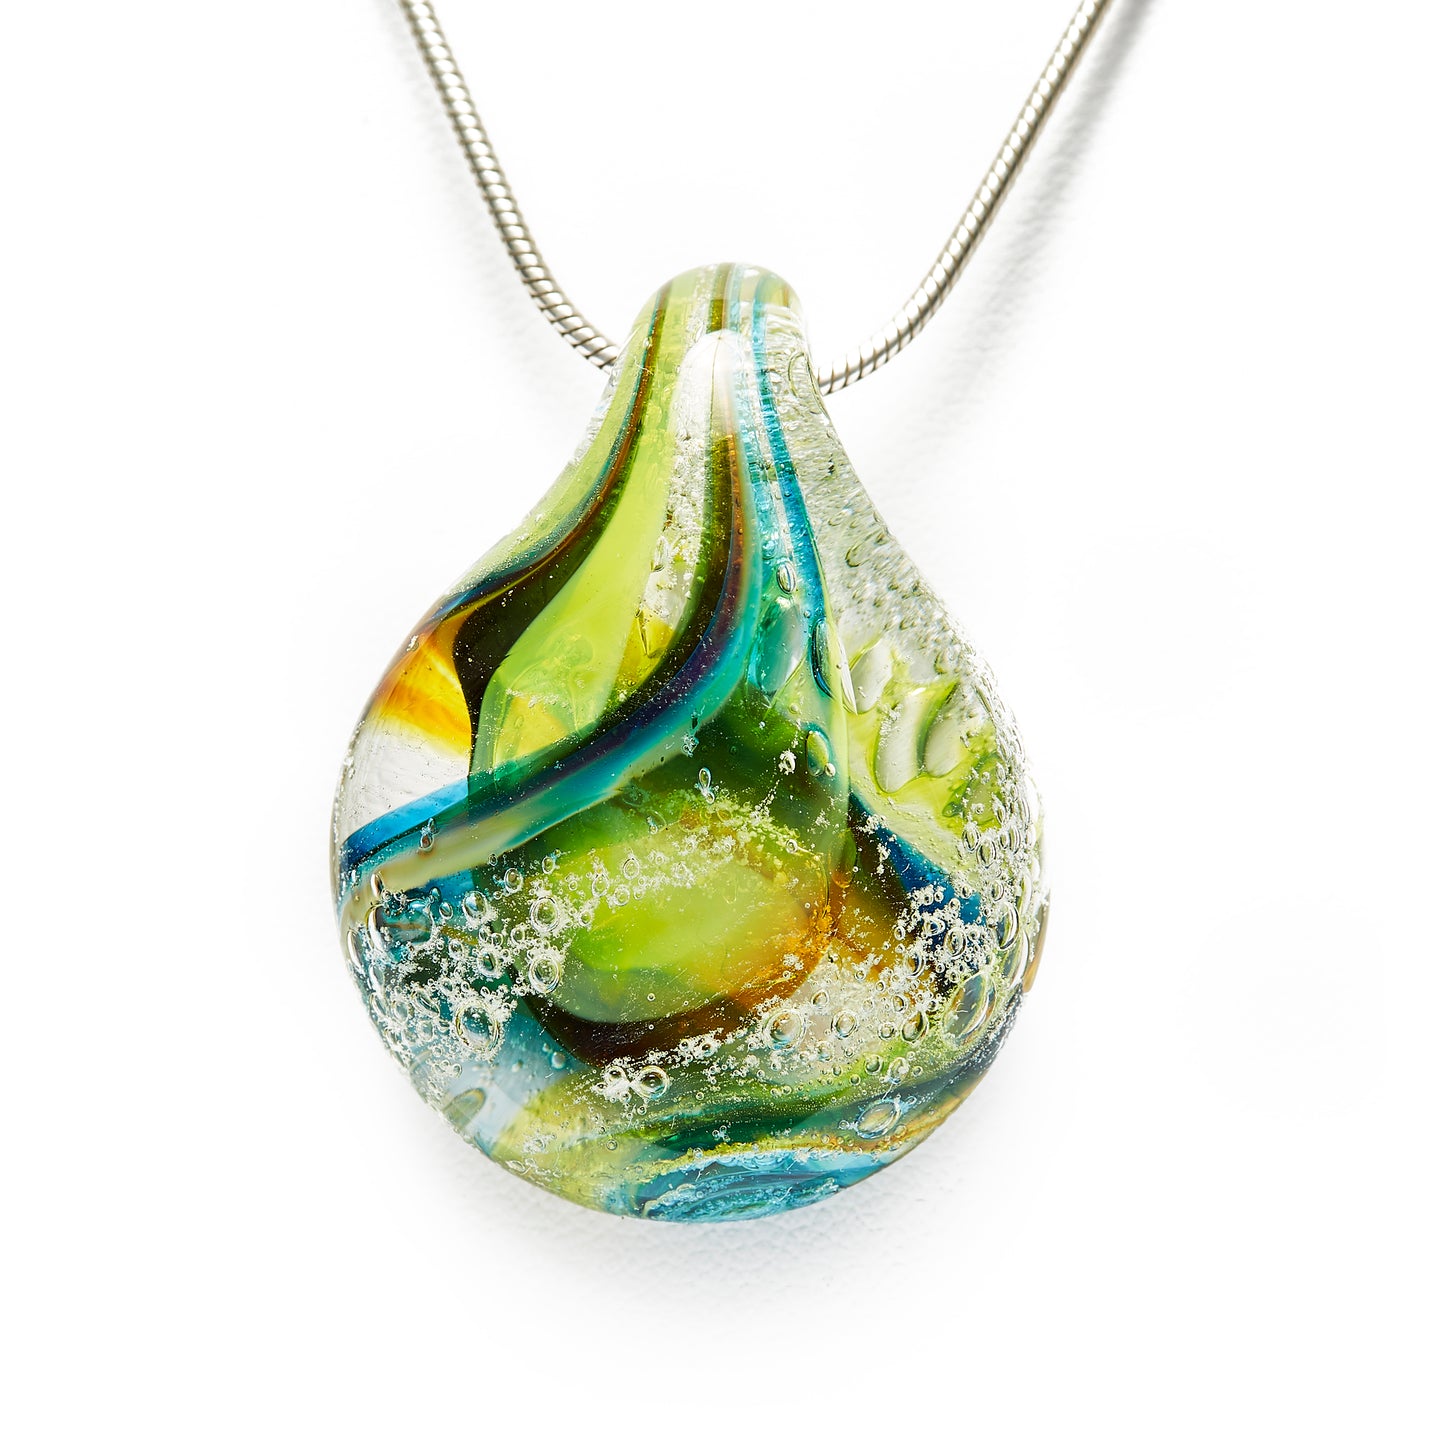 Memorial glass art pendant with cremation ash. Teal blue, yellow, and green glass. Colour combination is called "Summer."